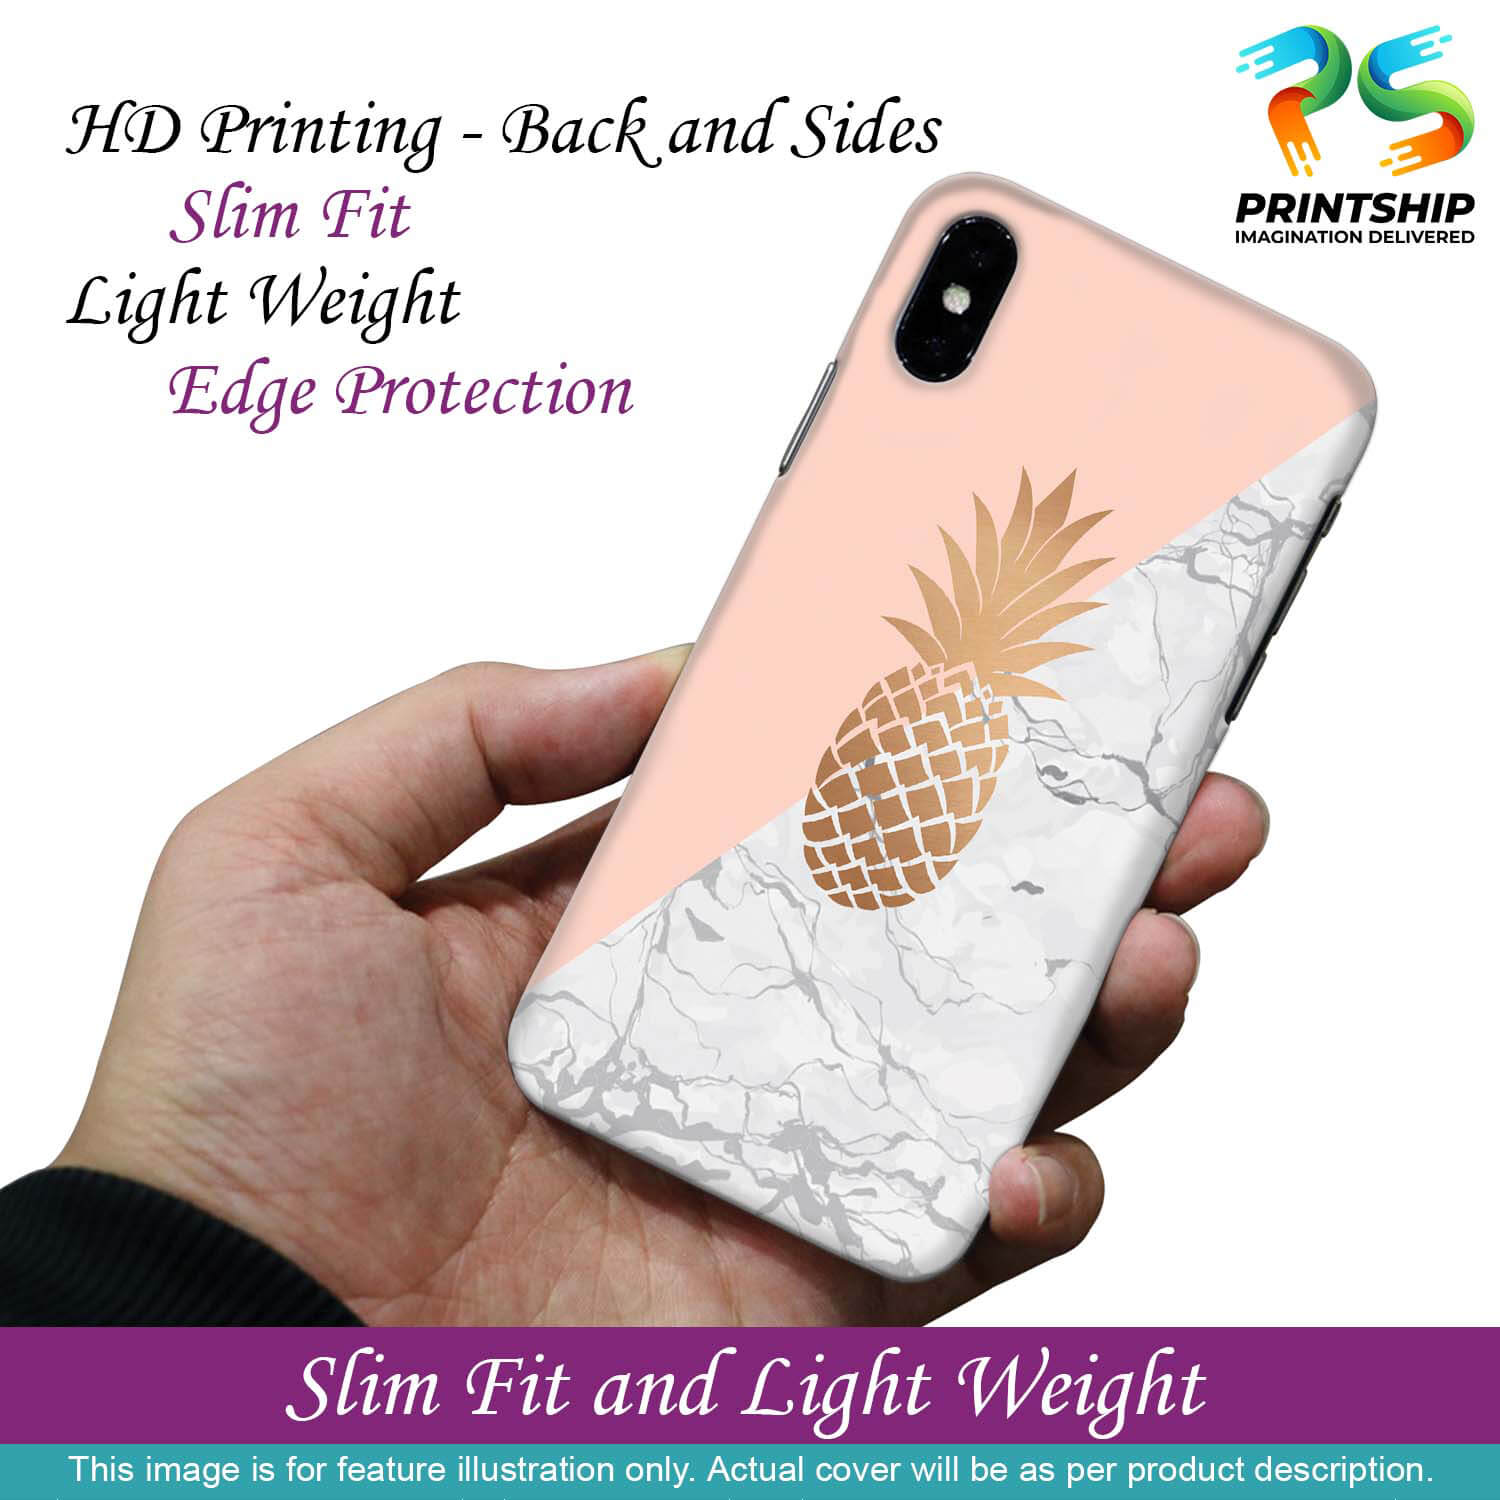 PS1330-Pineapple Marble Back Cover for Samsung Galaxy Note10 Lite